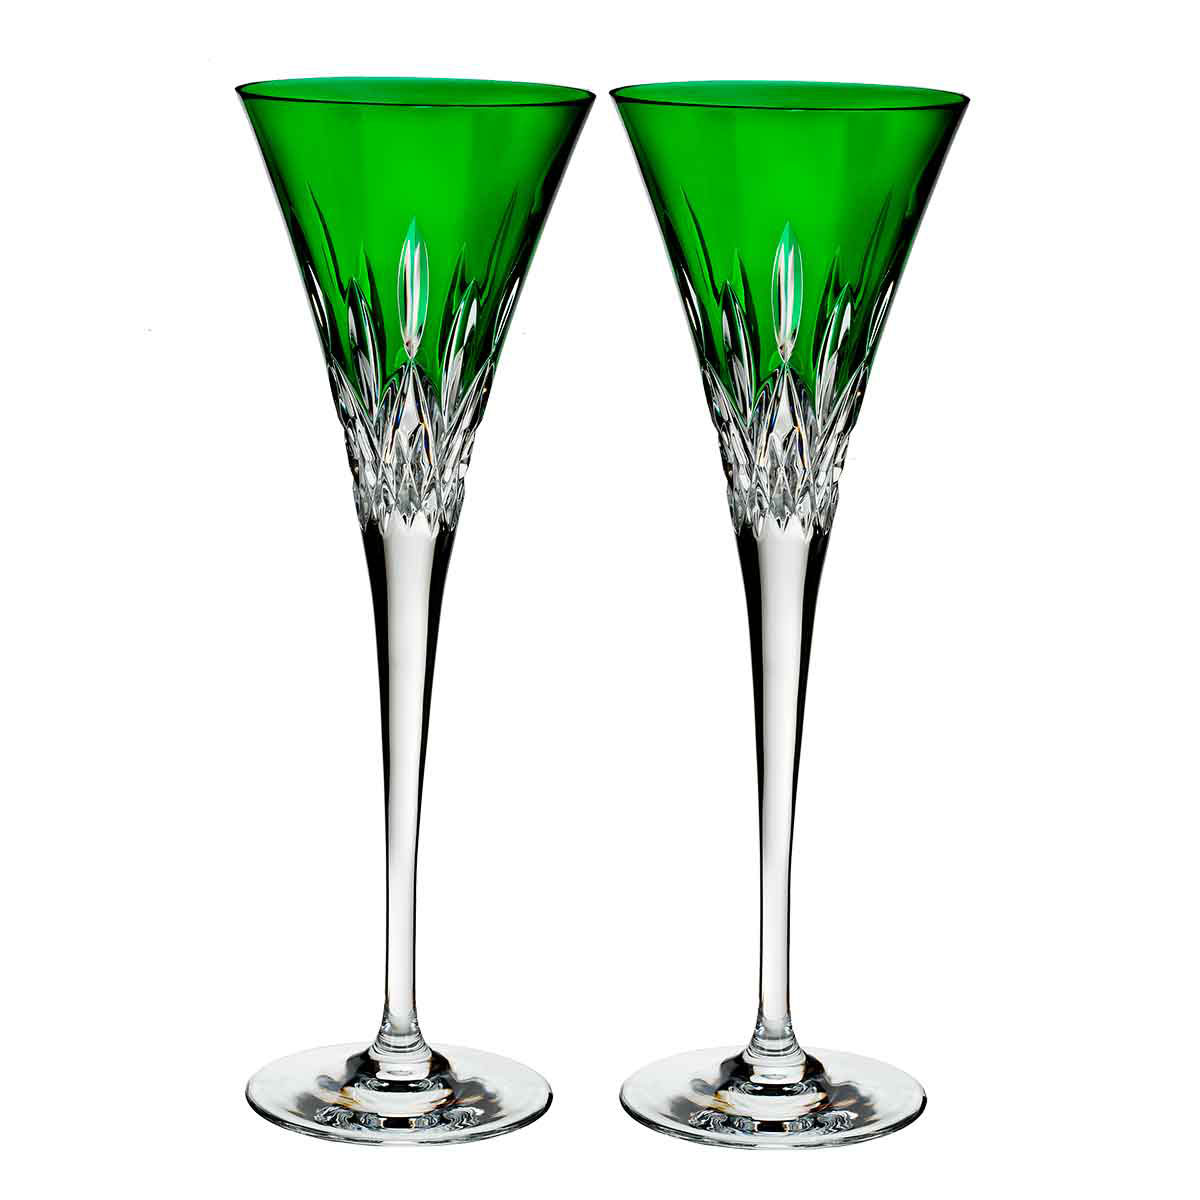 Waterford Crystal, Lismore Pops Emerald Toasting Crystal Flutes, Pair